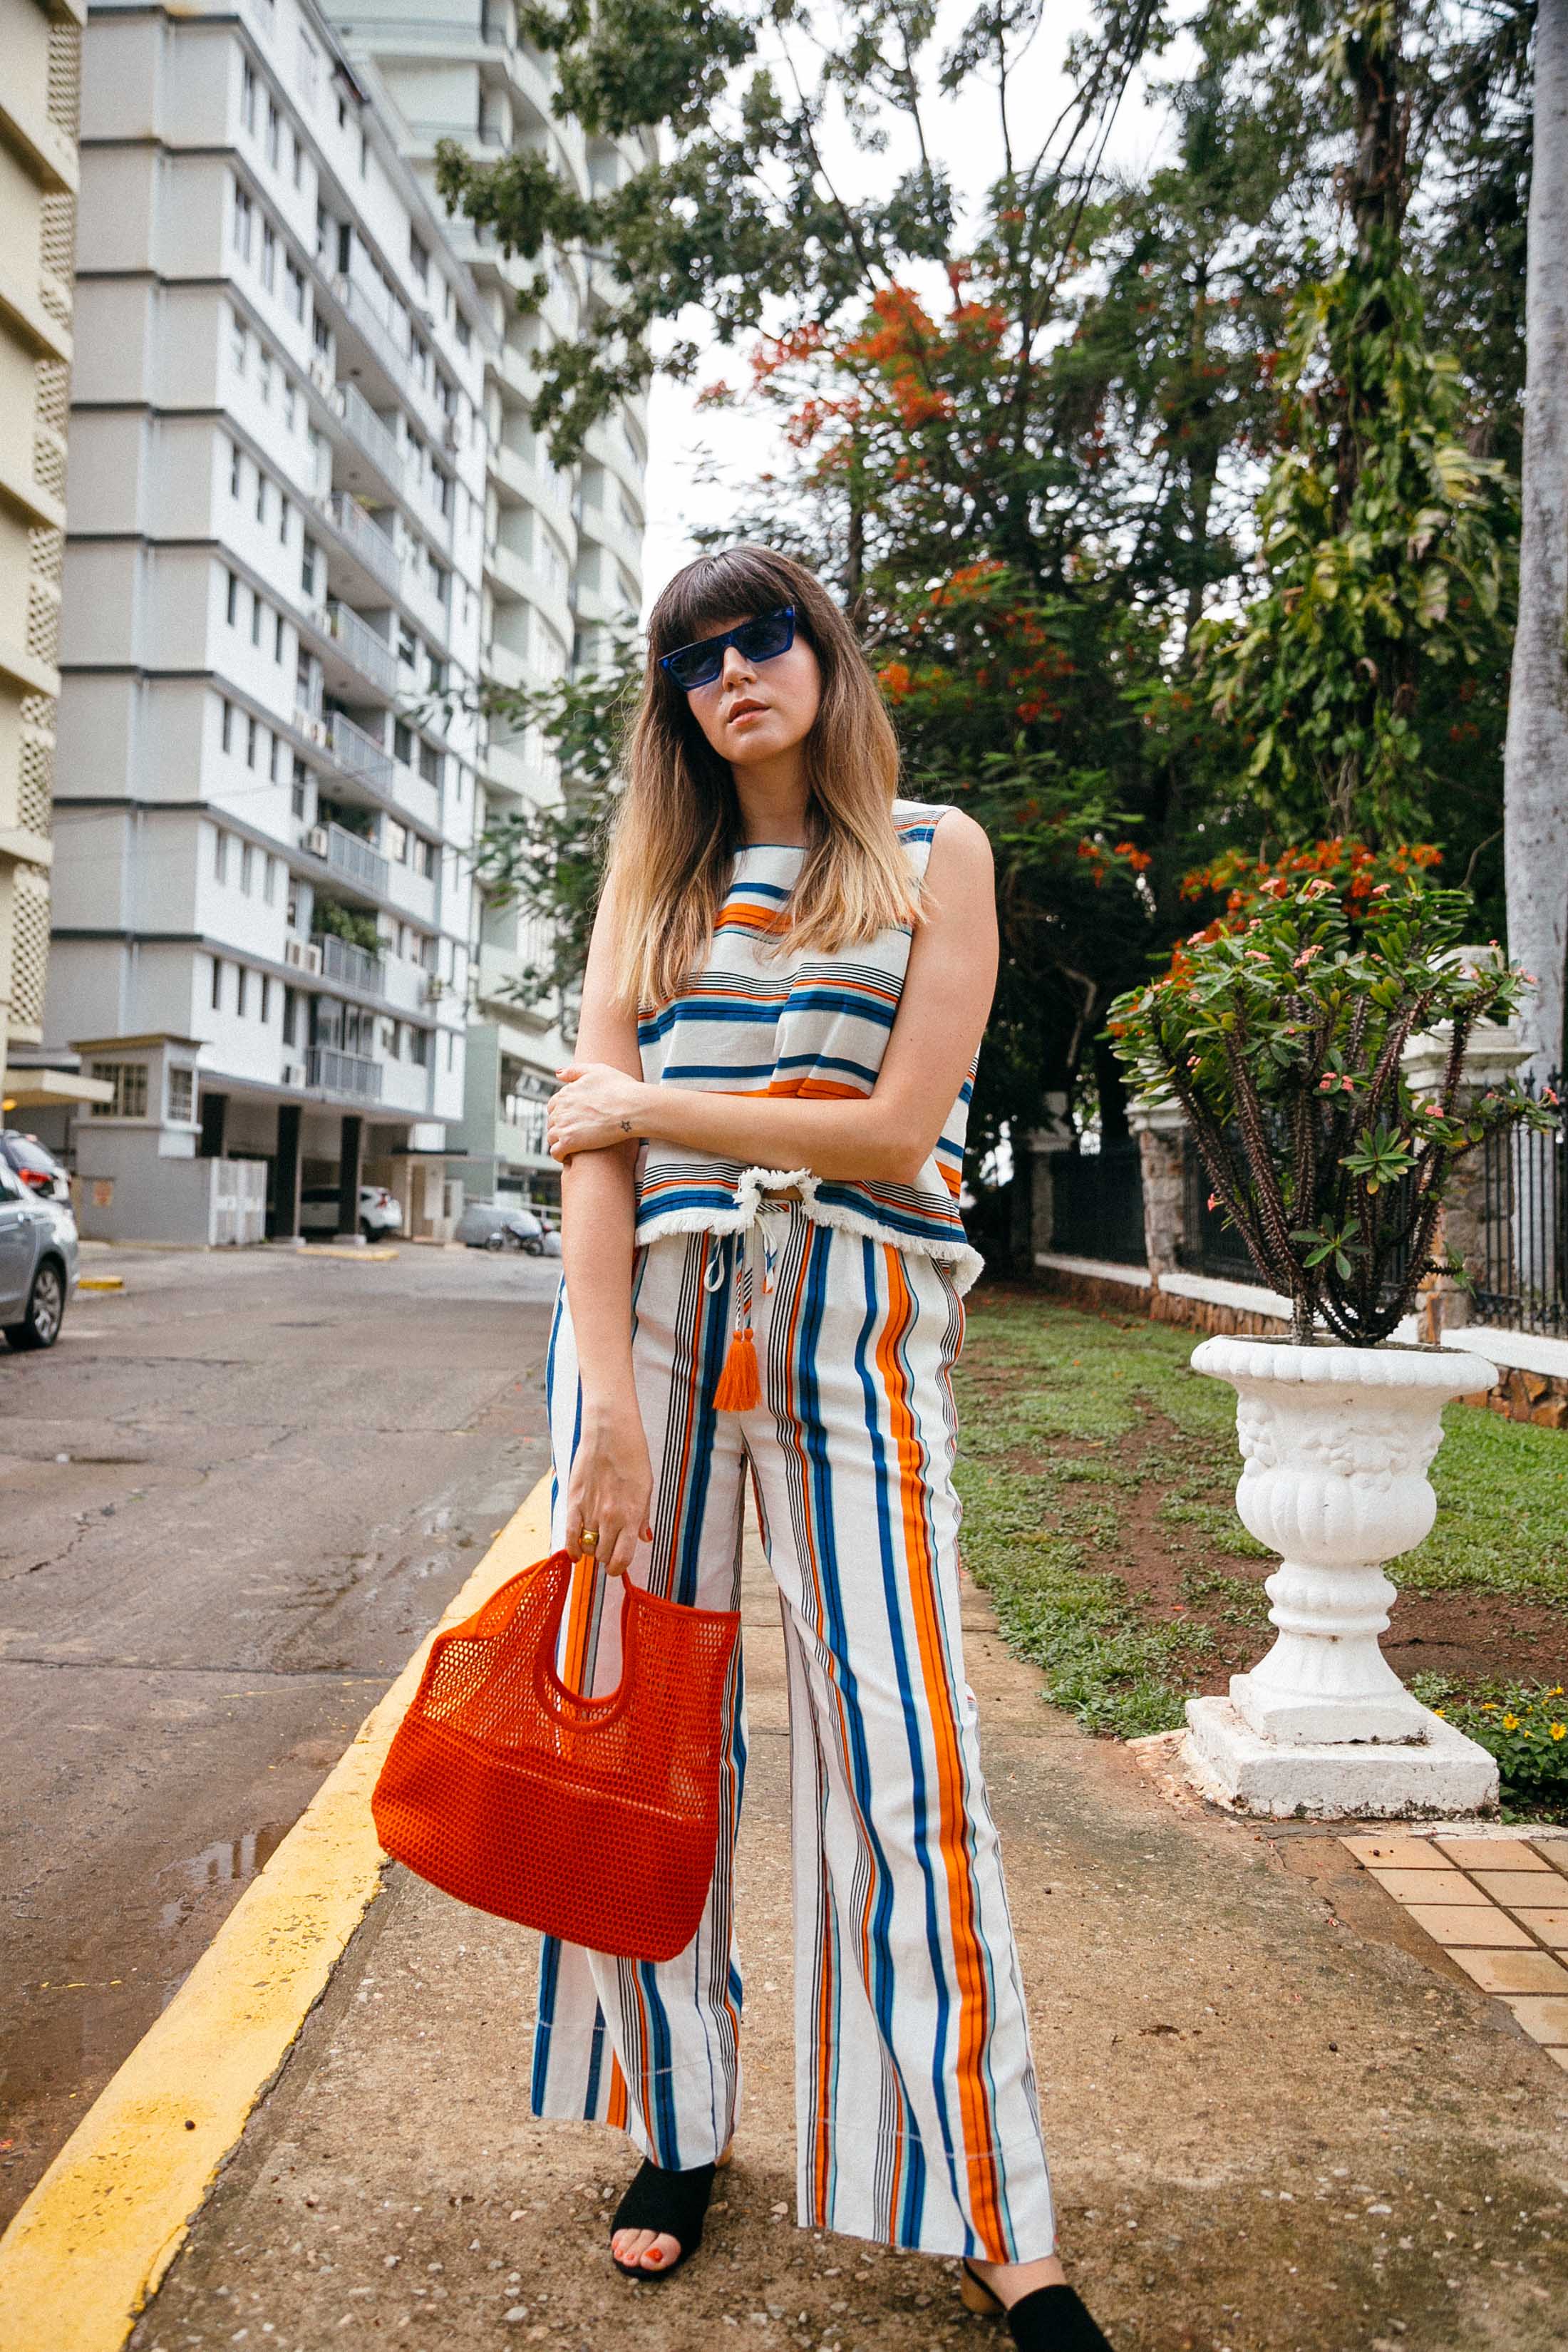 Maristella wears a stripe matching set from Moon River, black suede mules from Mango, red net tote bag from COS, blue sunglasses from Mango